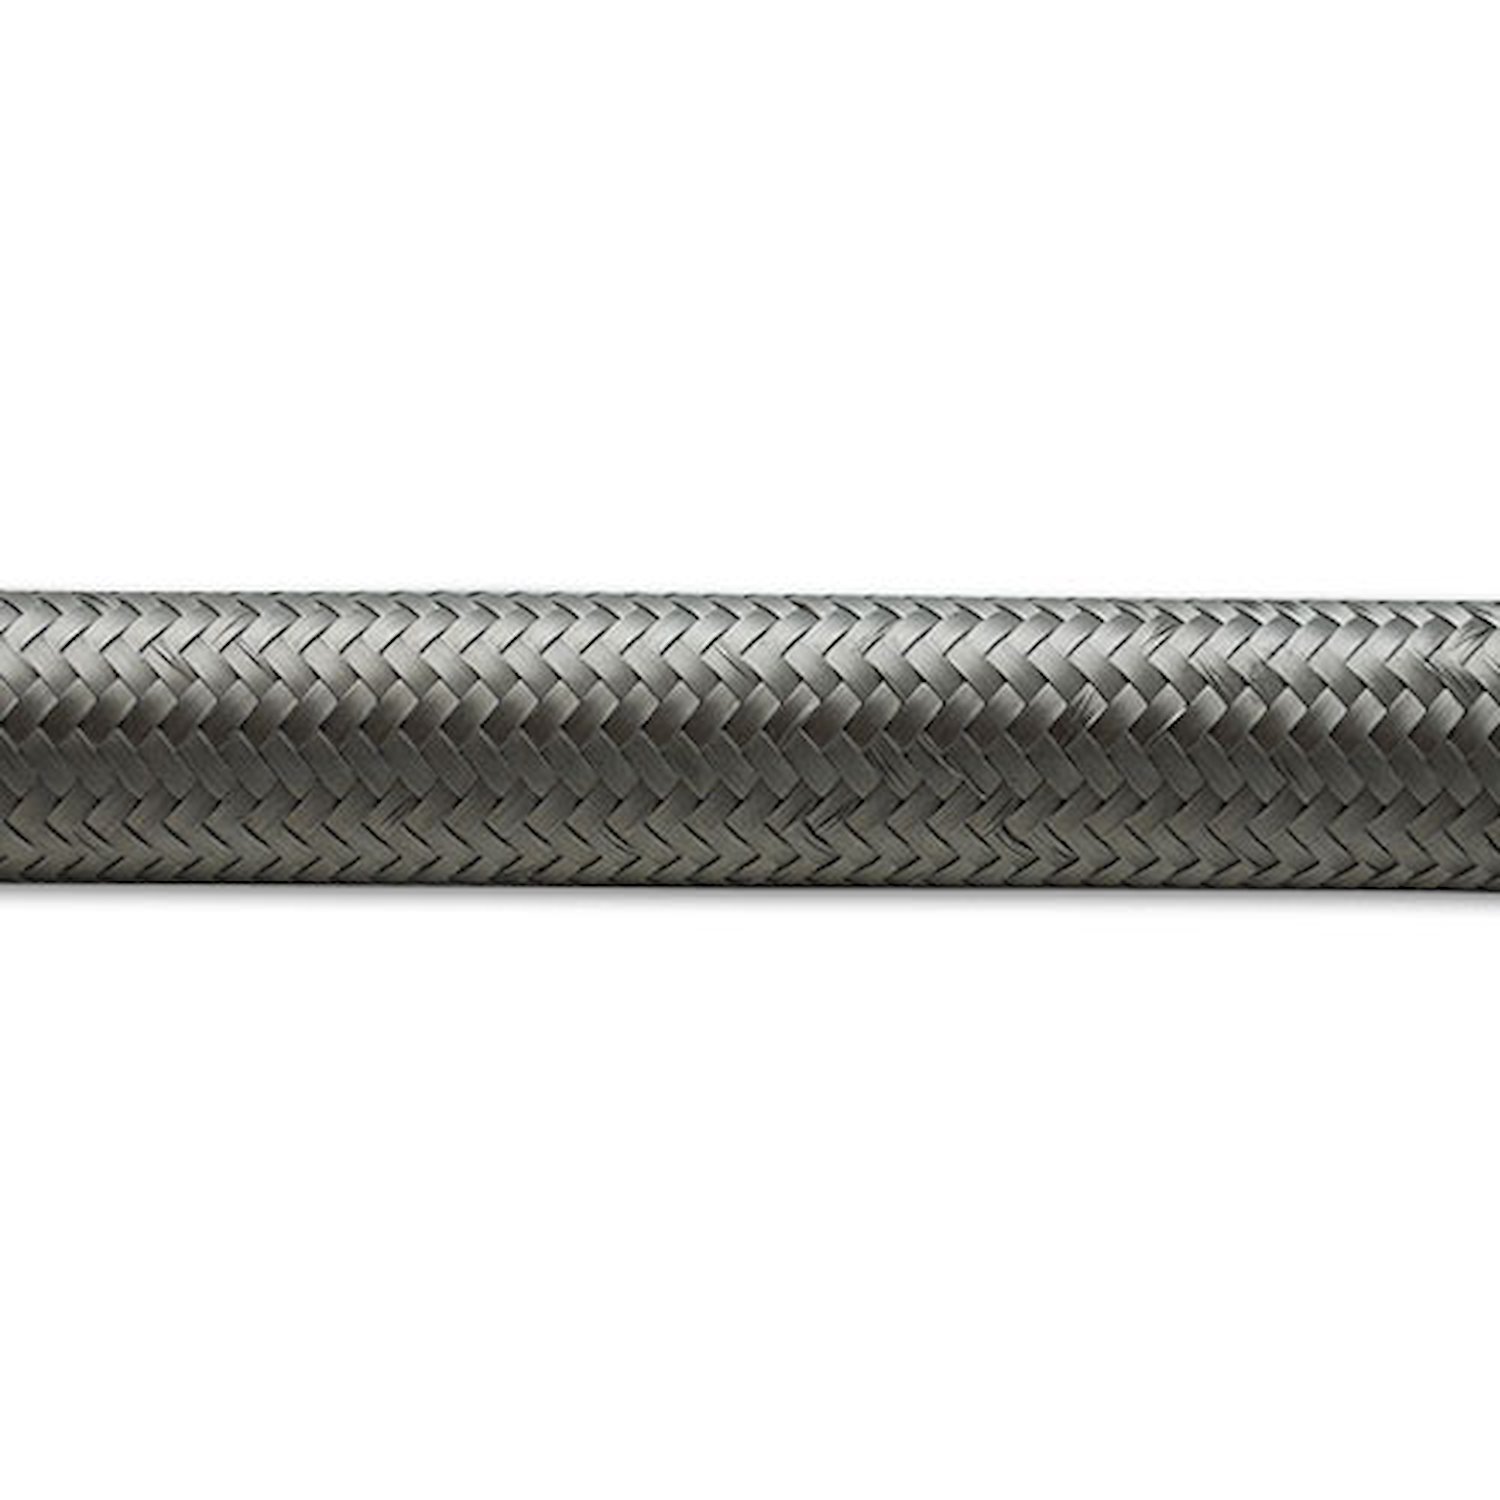 Stainless Steel Braided Flex Hose -20AN Size